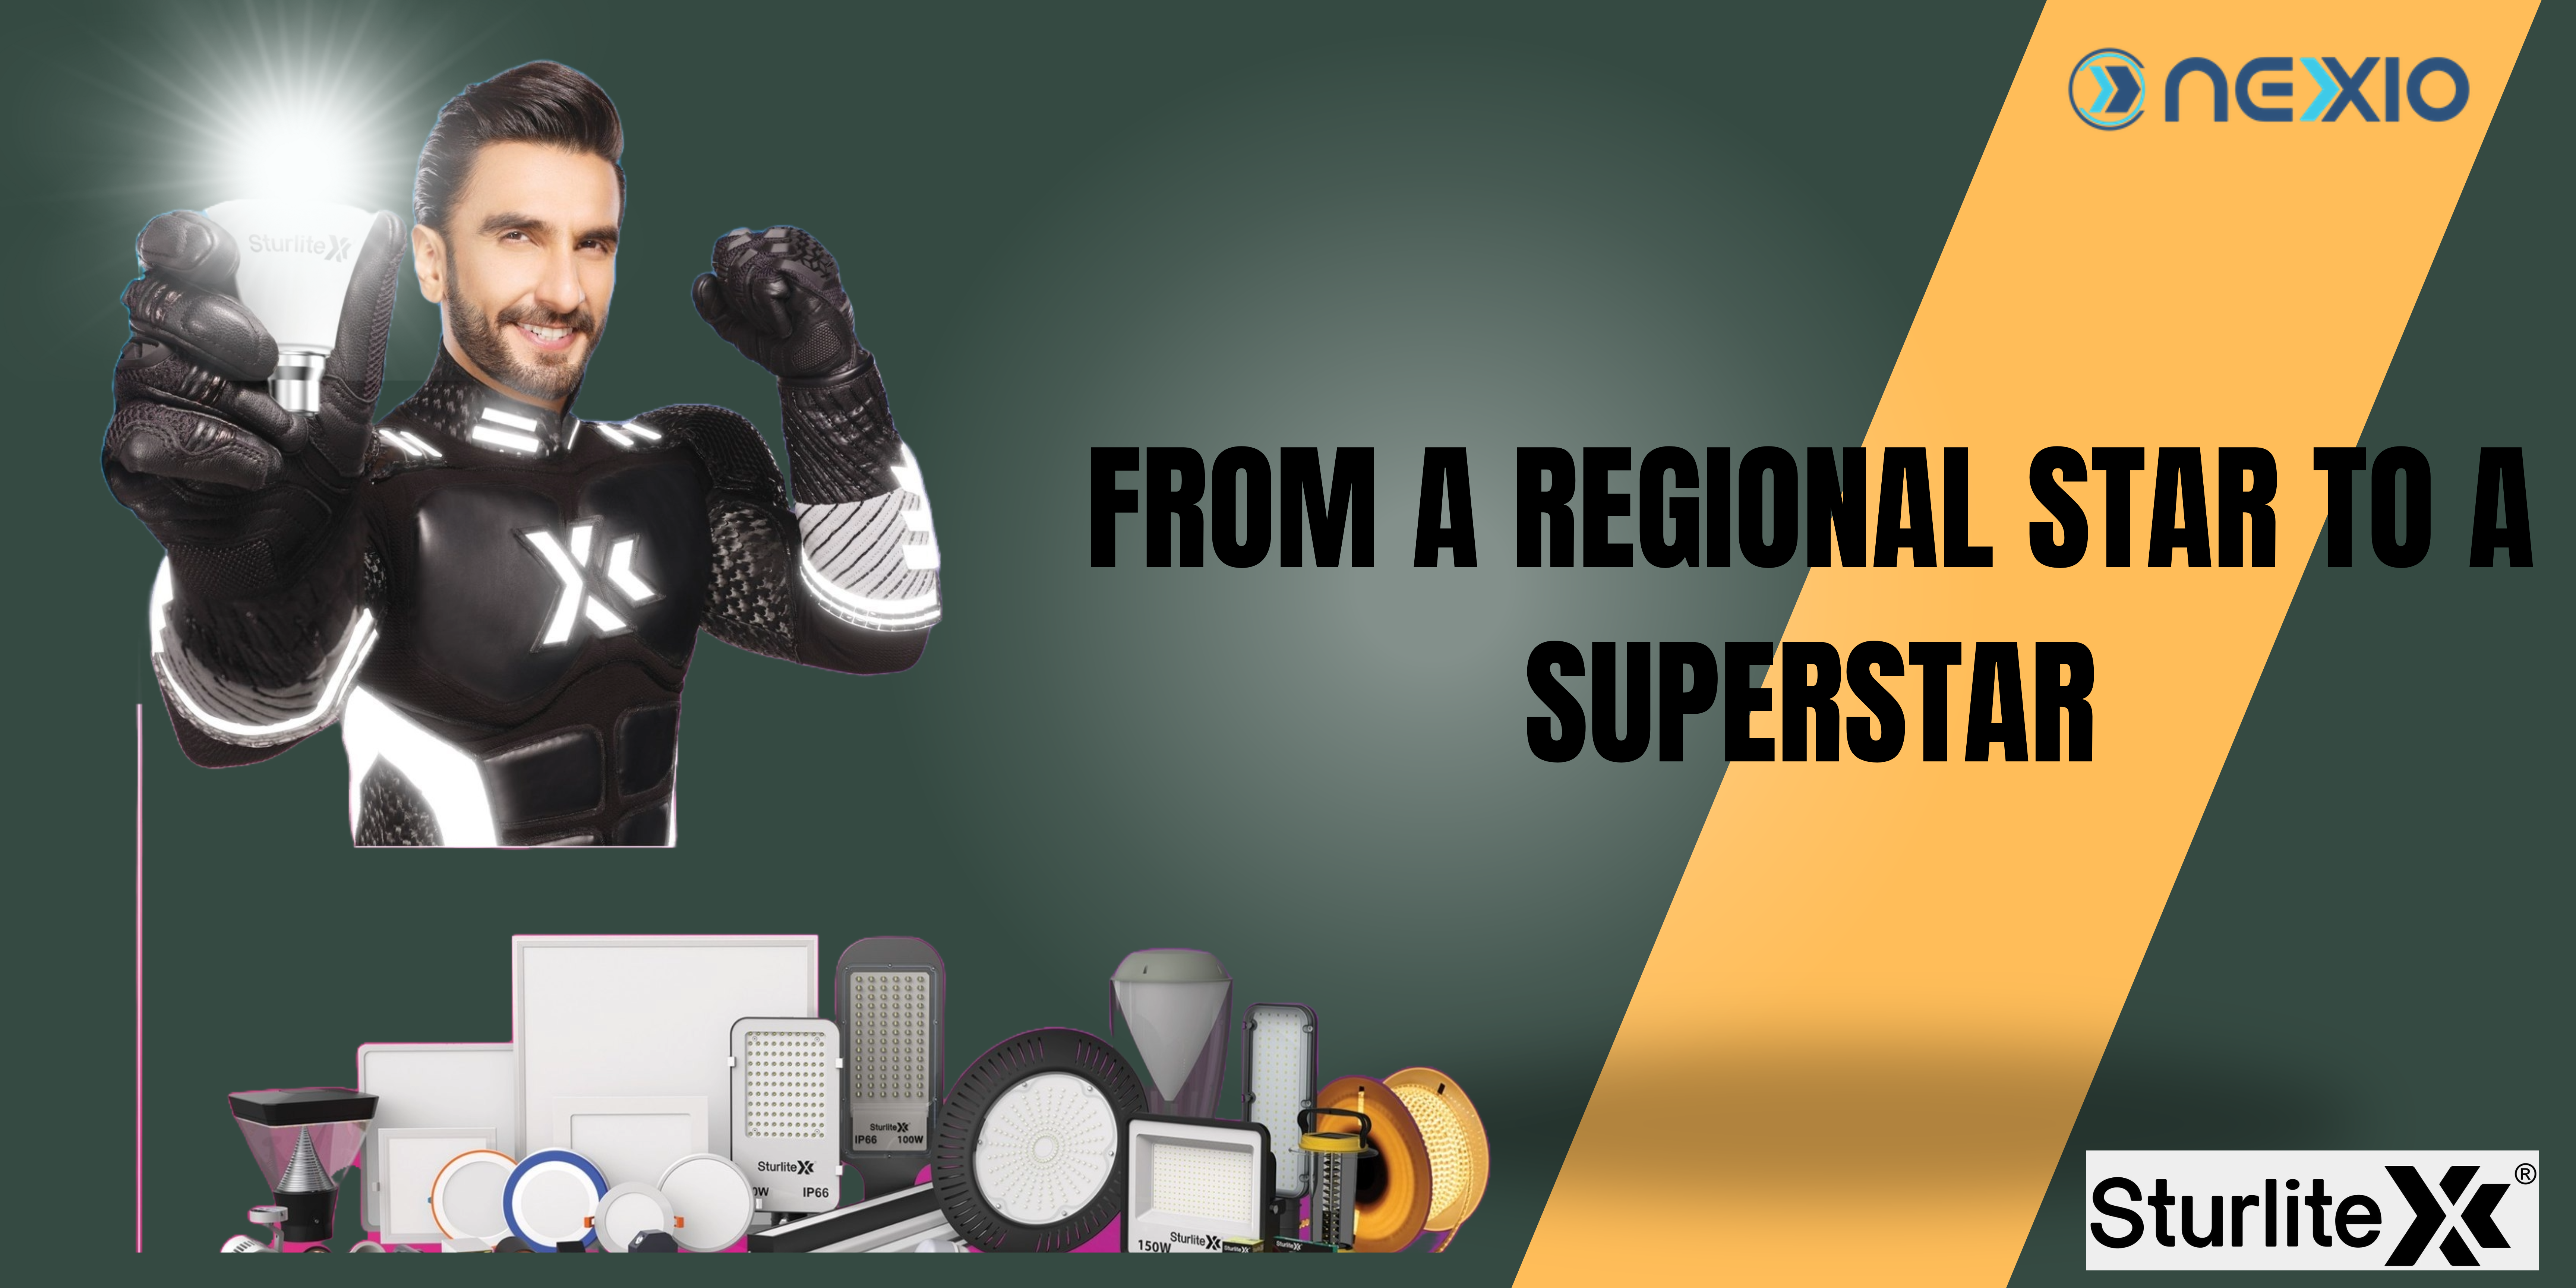 FROM A REGIONAL STAR TO A SUPERSTAR: THE ELECTRIFYING JOURNEY OF A REGIONAL BRAND GOING NATIONAL